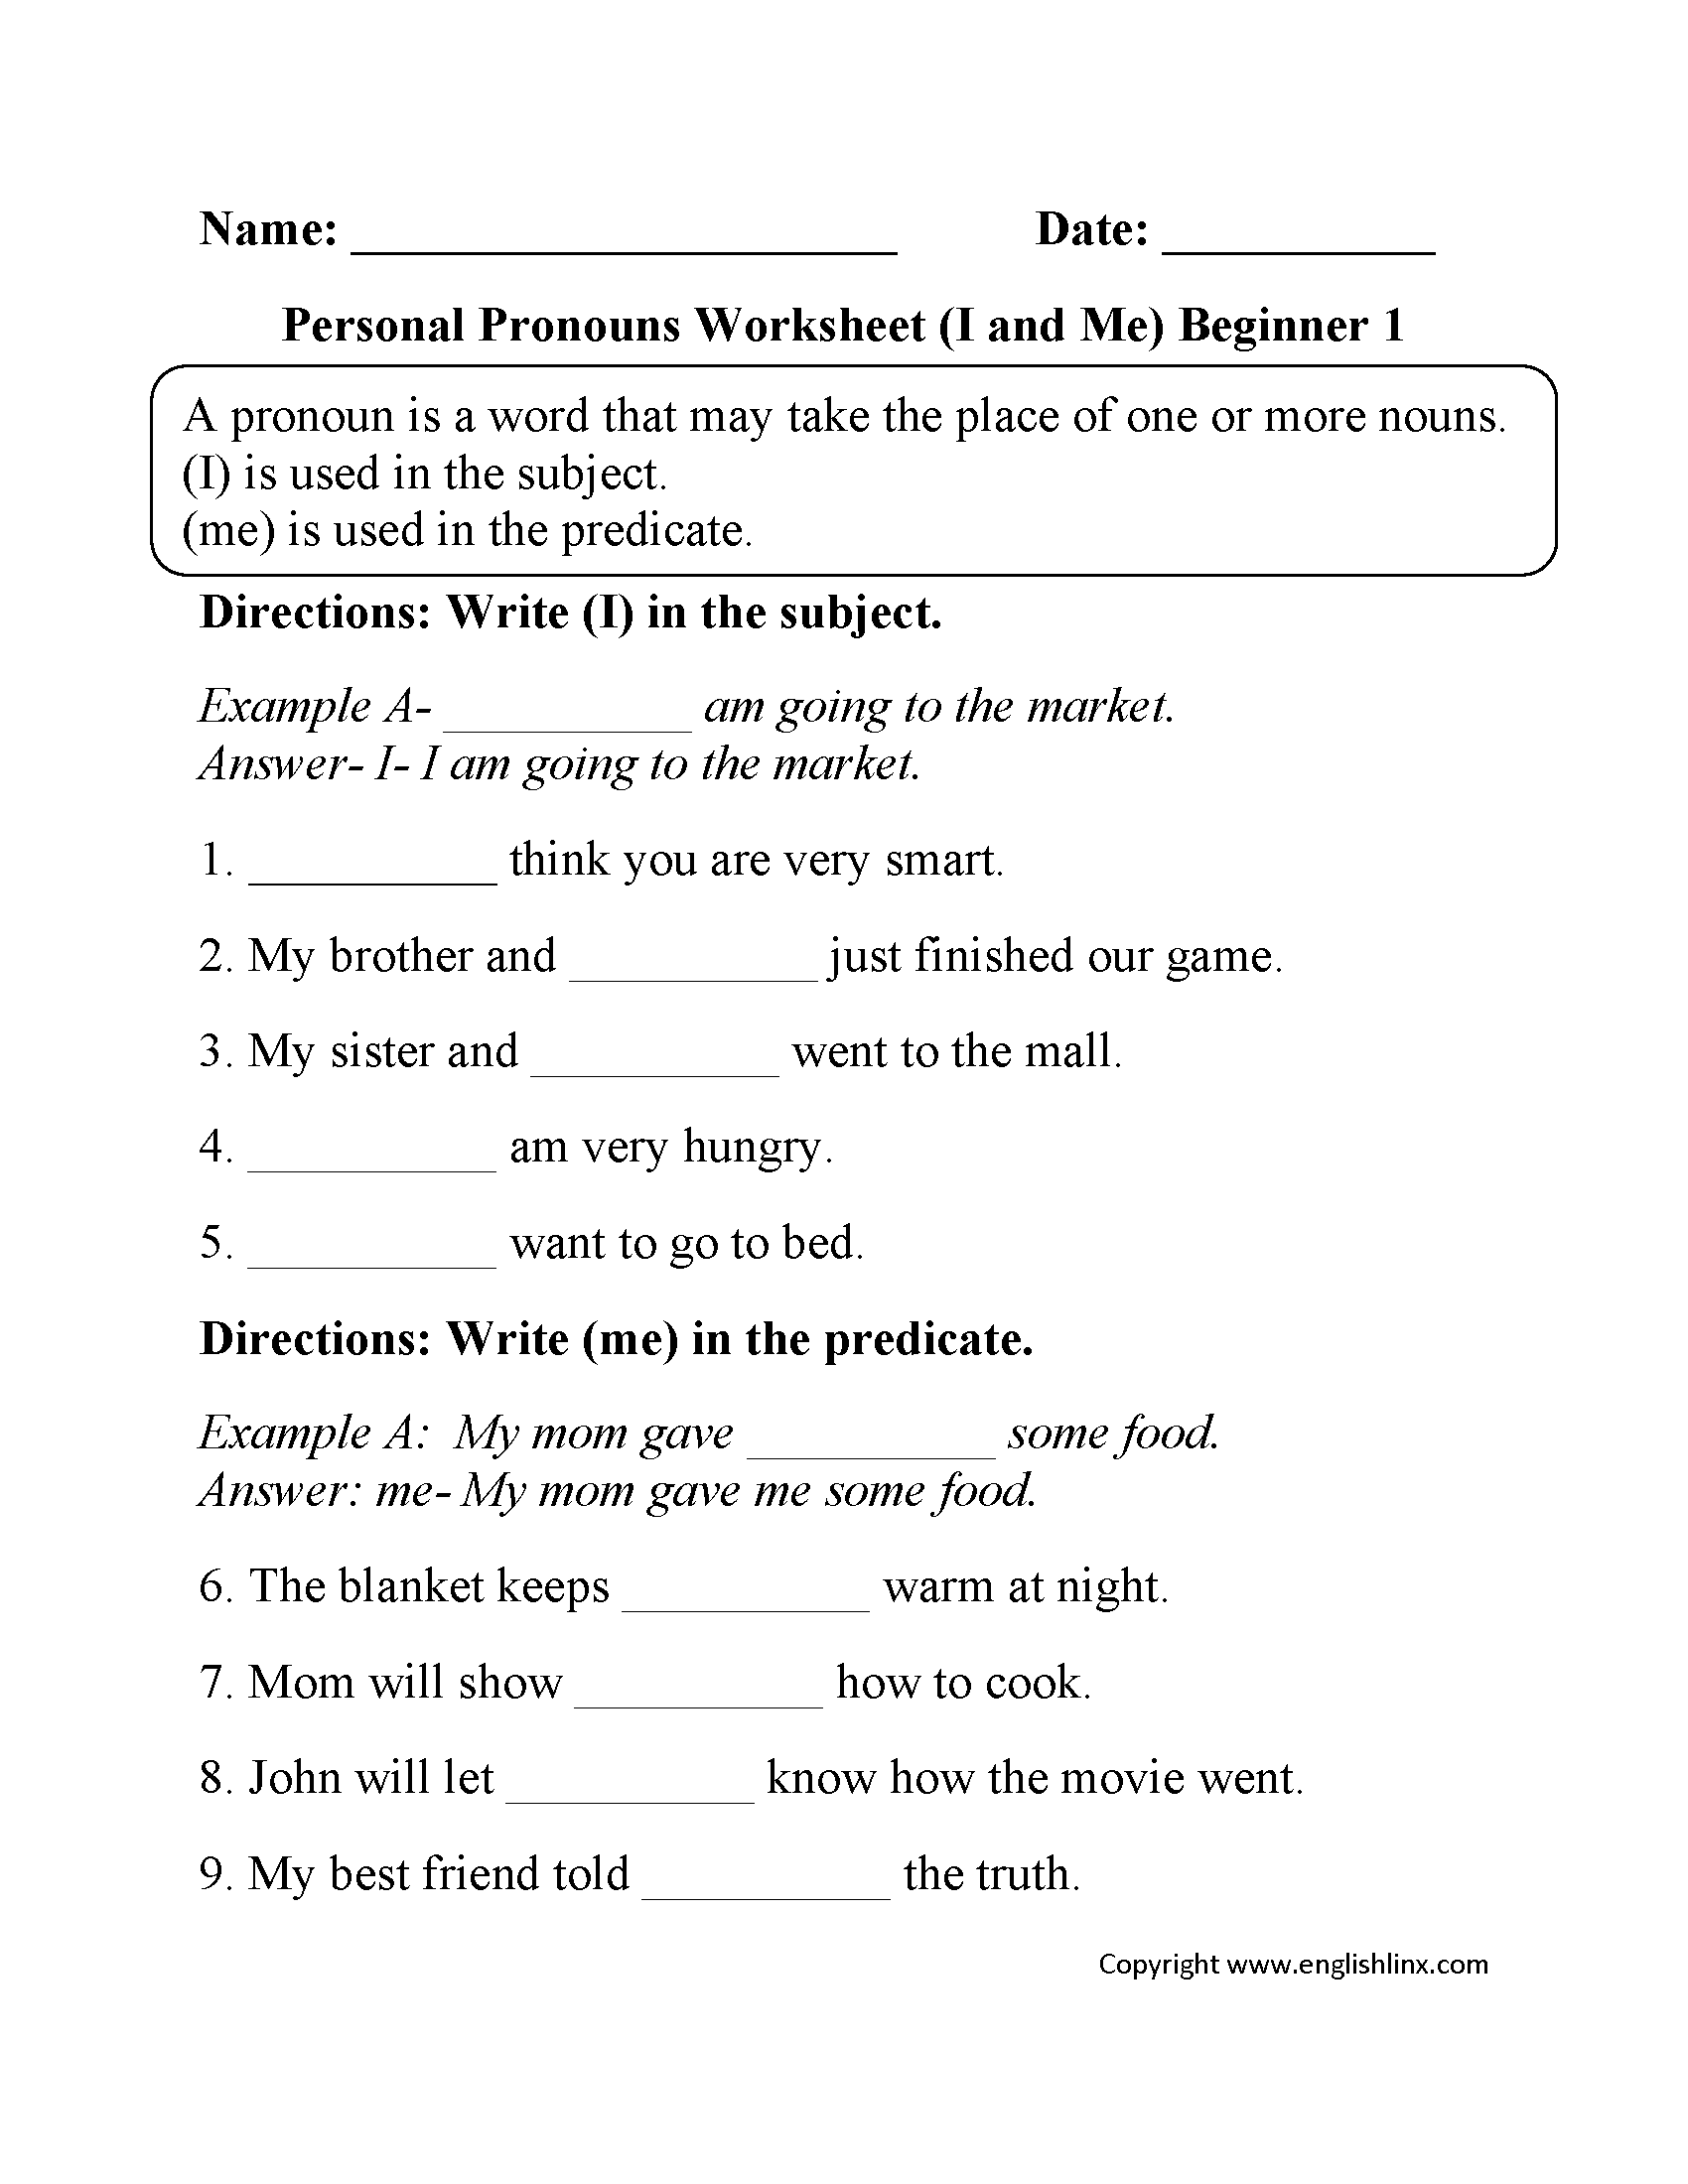 I and Me Personal Pronouns Worksheets Beginner Part 1